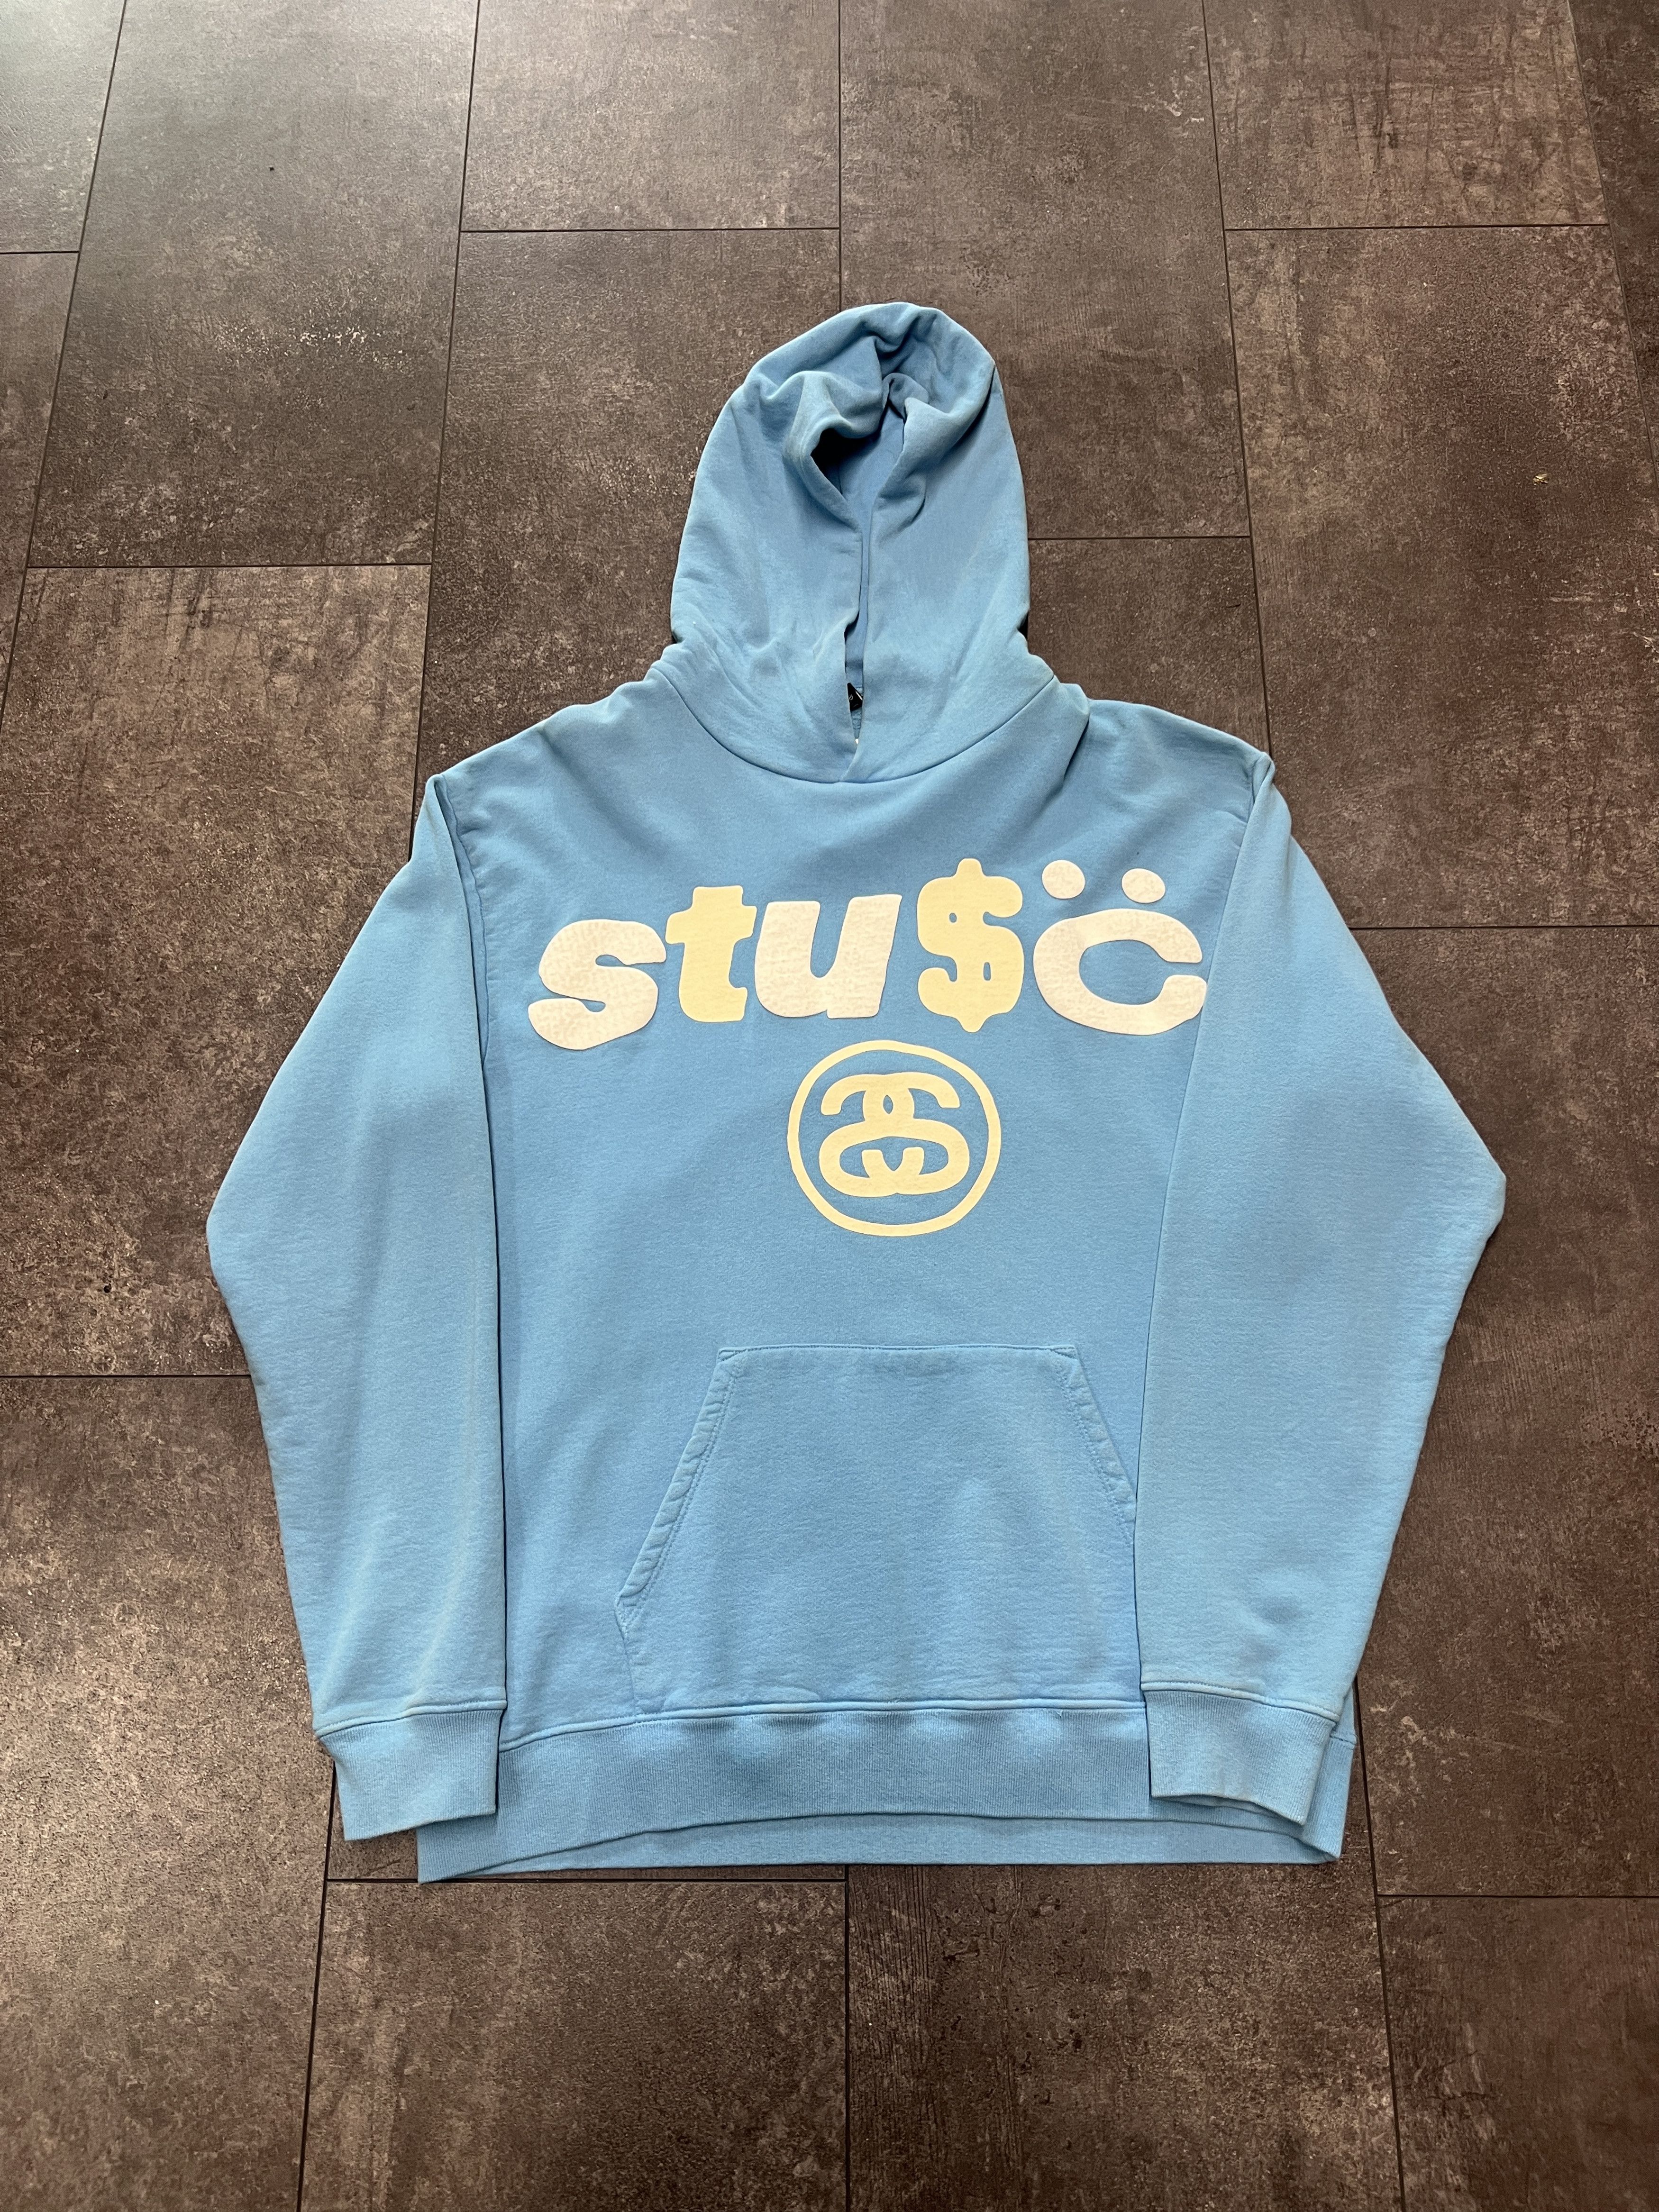 Stussy Stussy CPFM 8 Ball Pigment Dyed Hoodie | Grailed